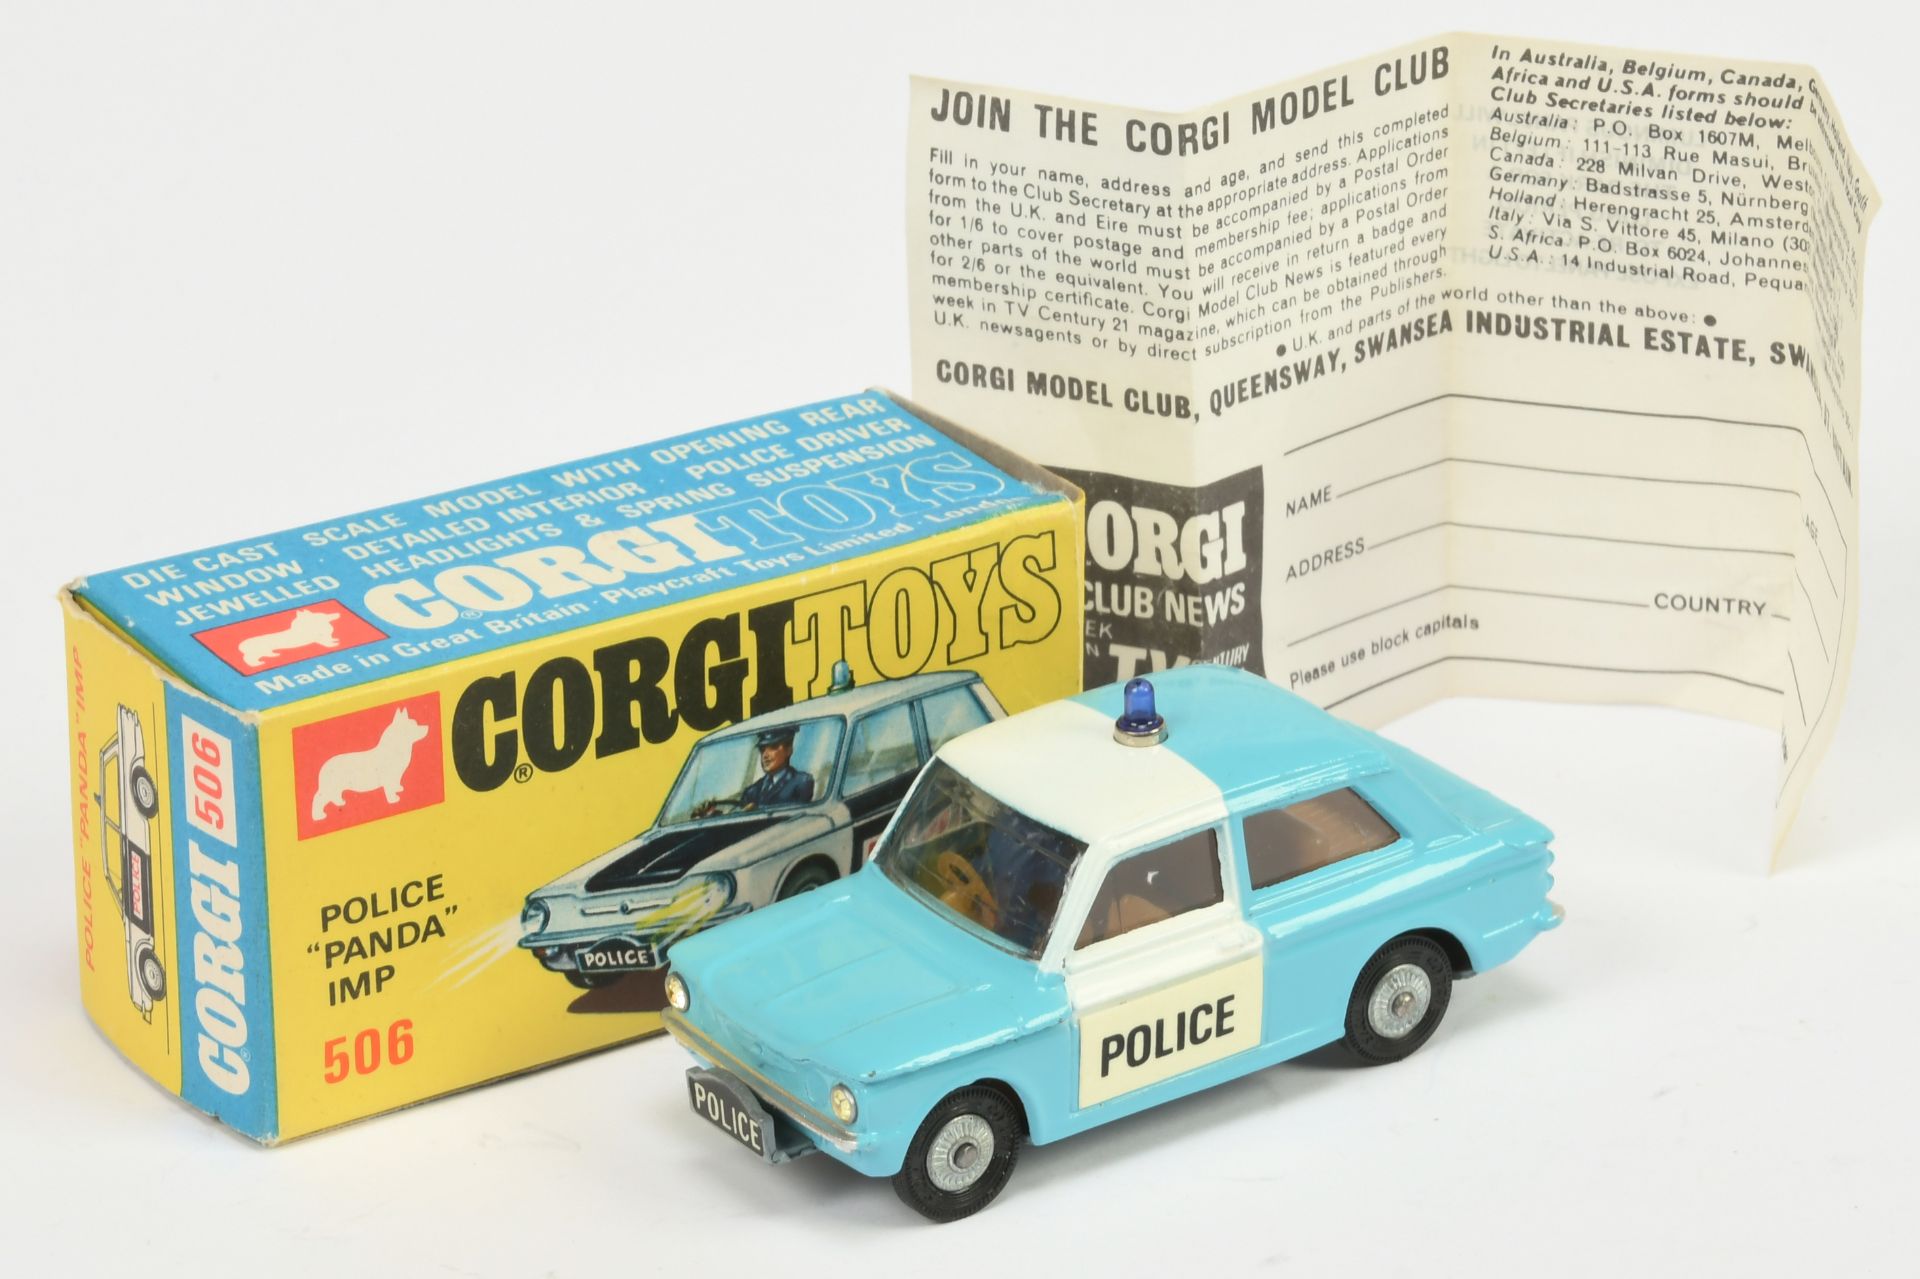 Corgi Toys 506 Sunbeam Imp "Police" Car - Light blue body with white roof band and doors, brown i...